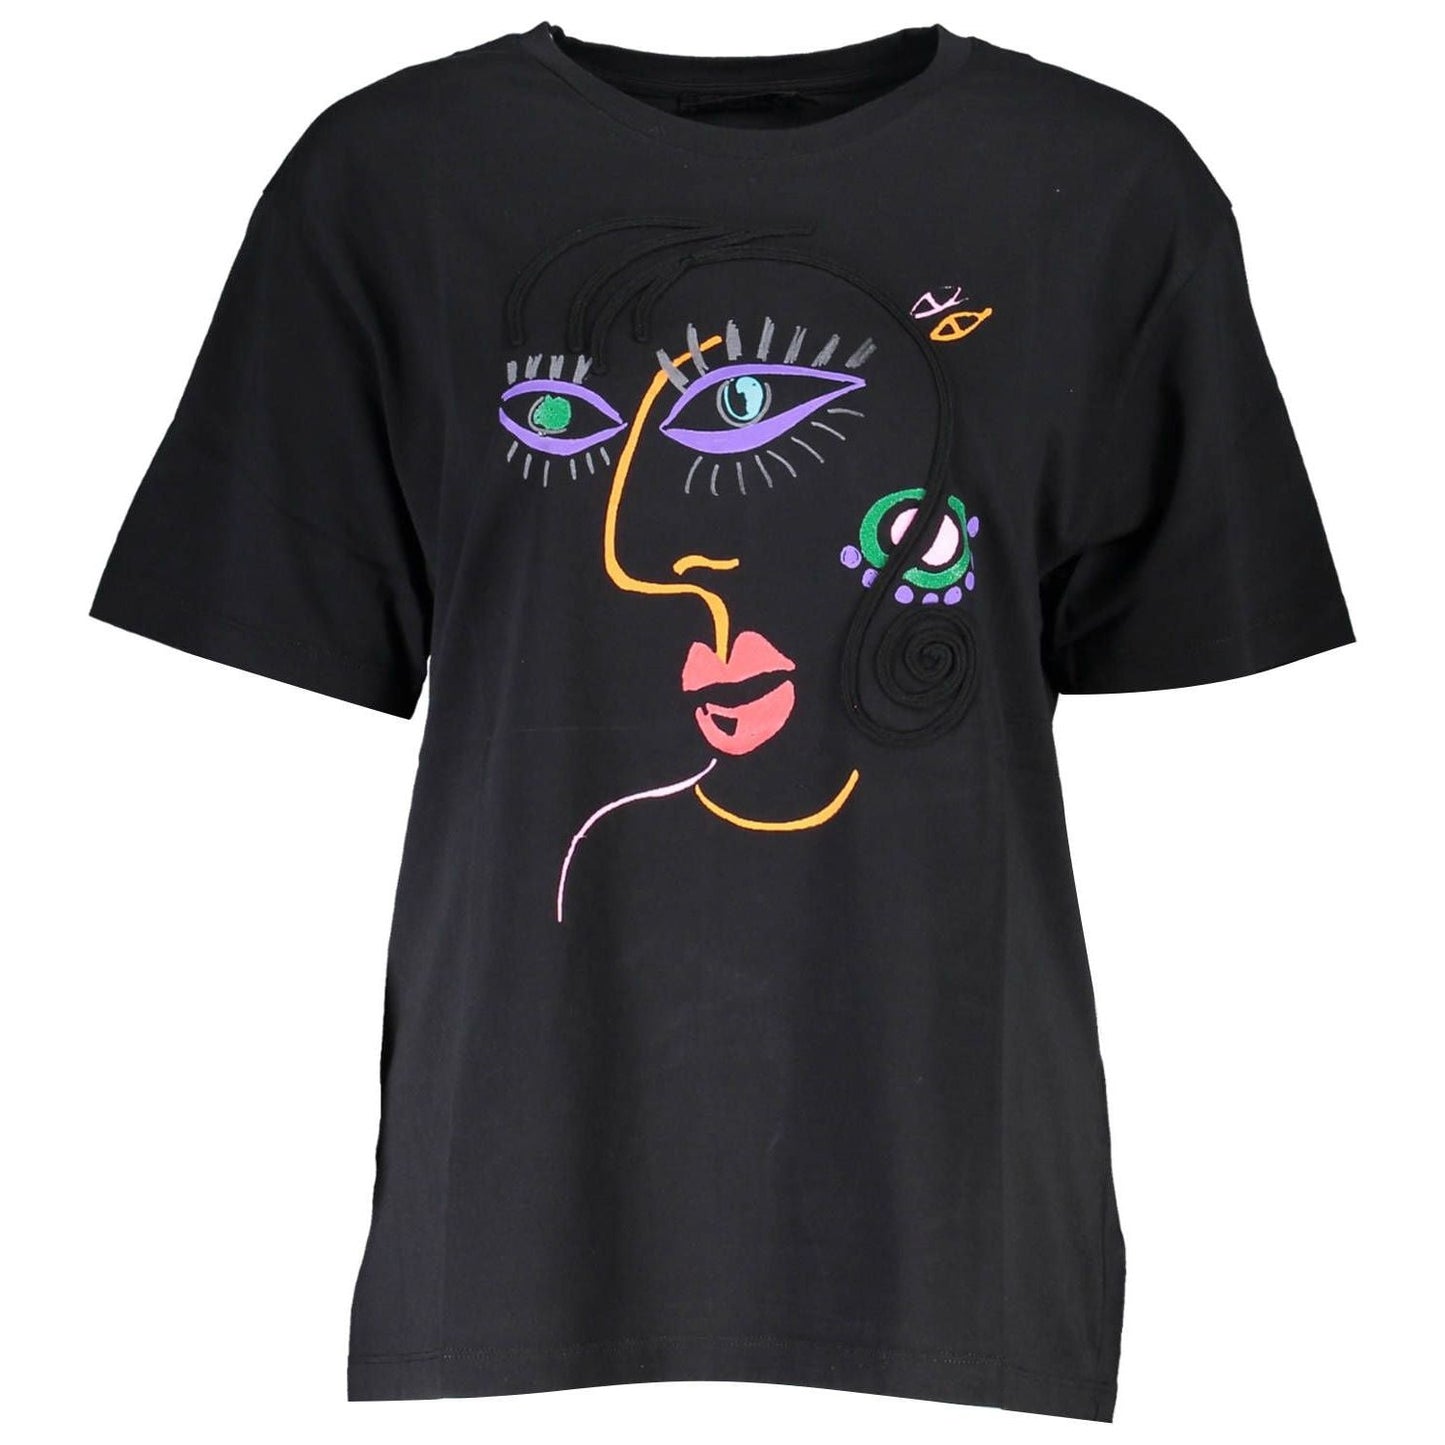 Desigual Chic Embroidered Black Tee with Artistic Flair chic-embroidered-black-tee-with-artistic-flair